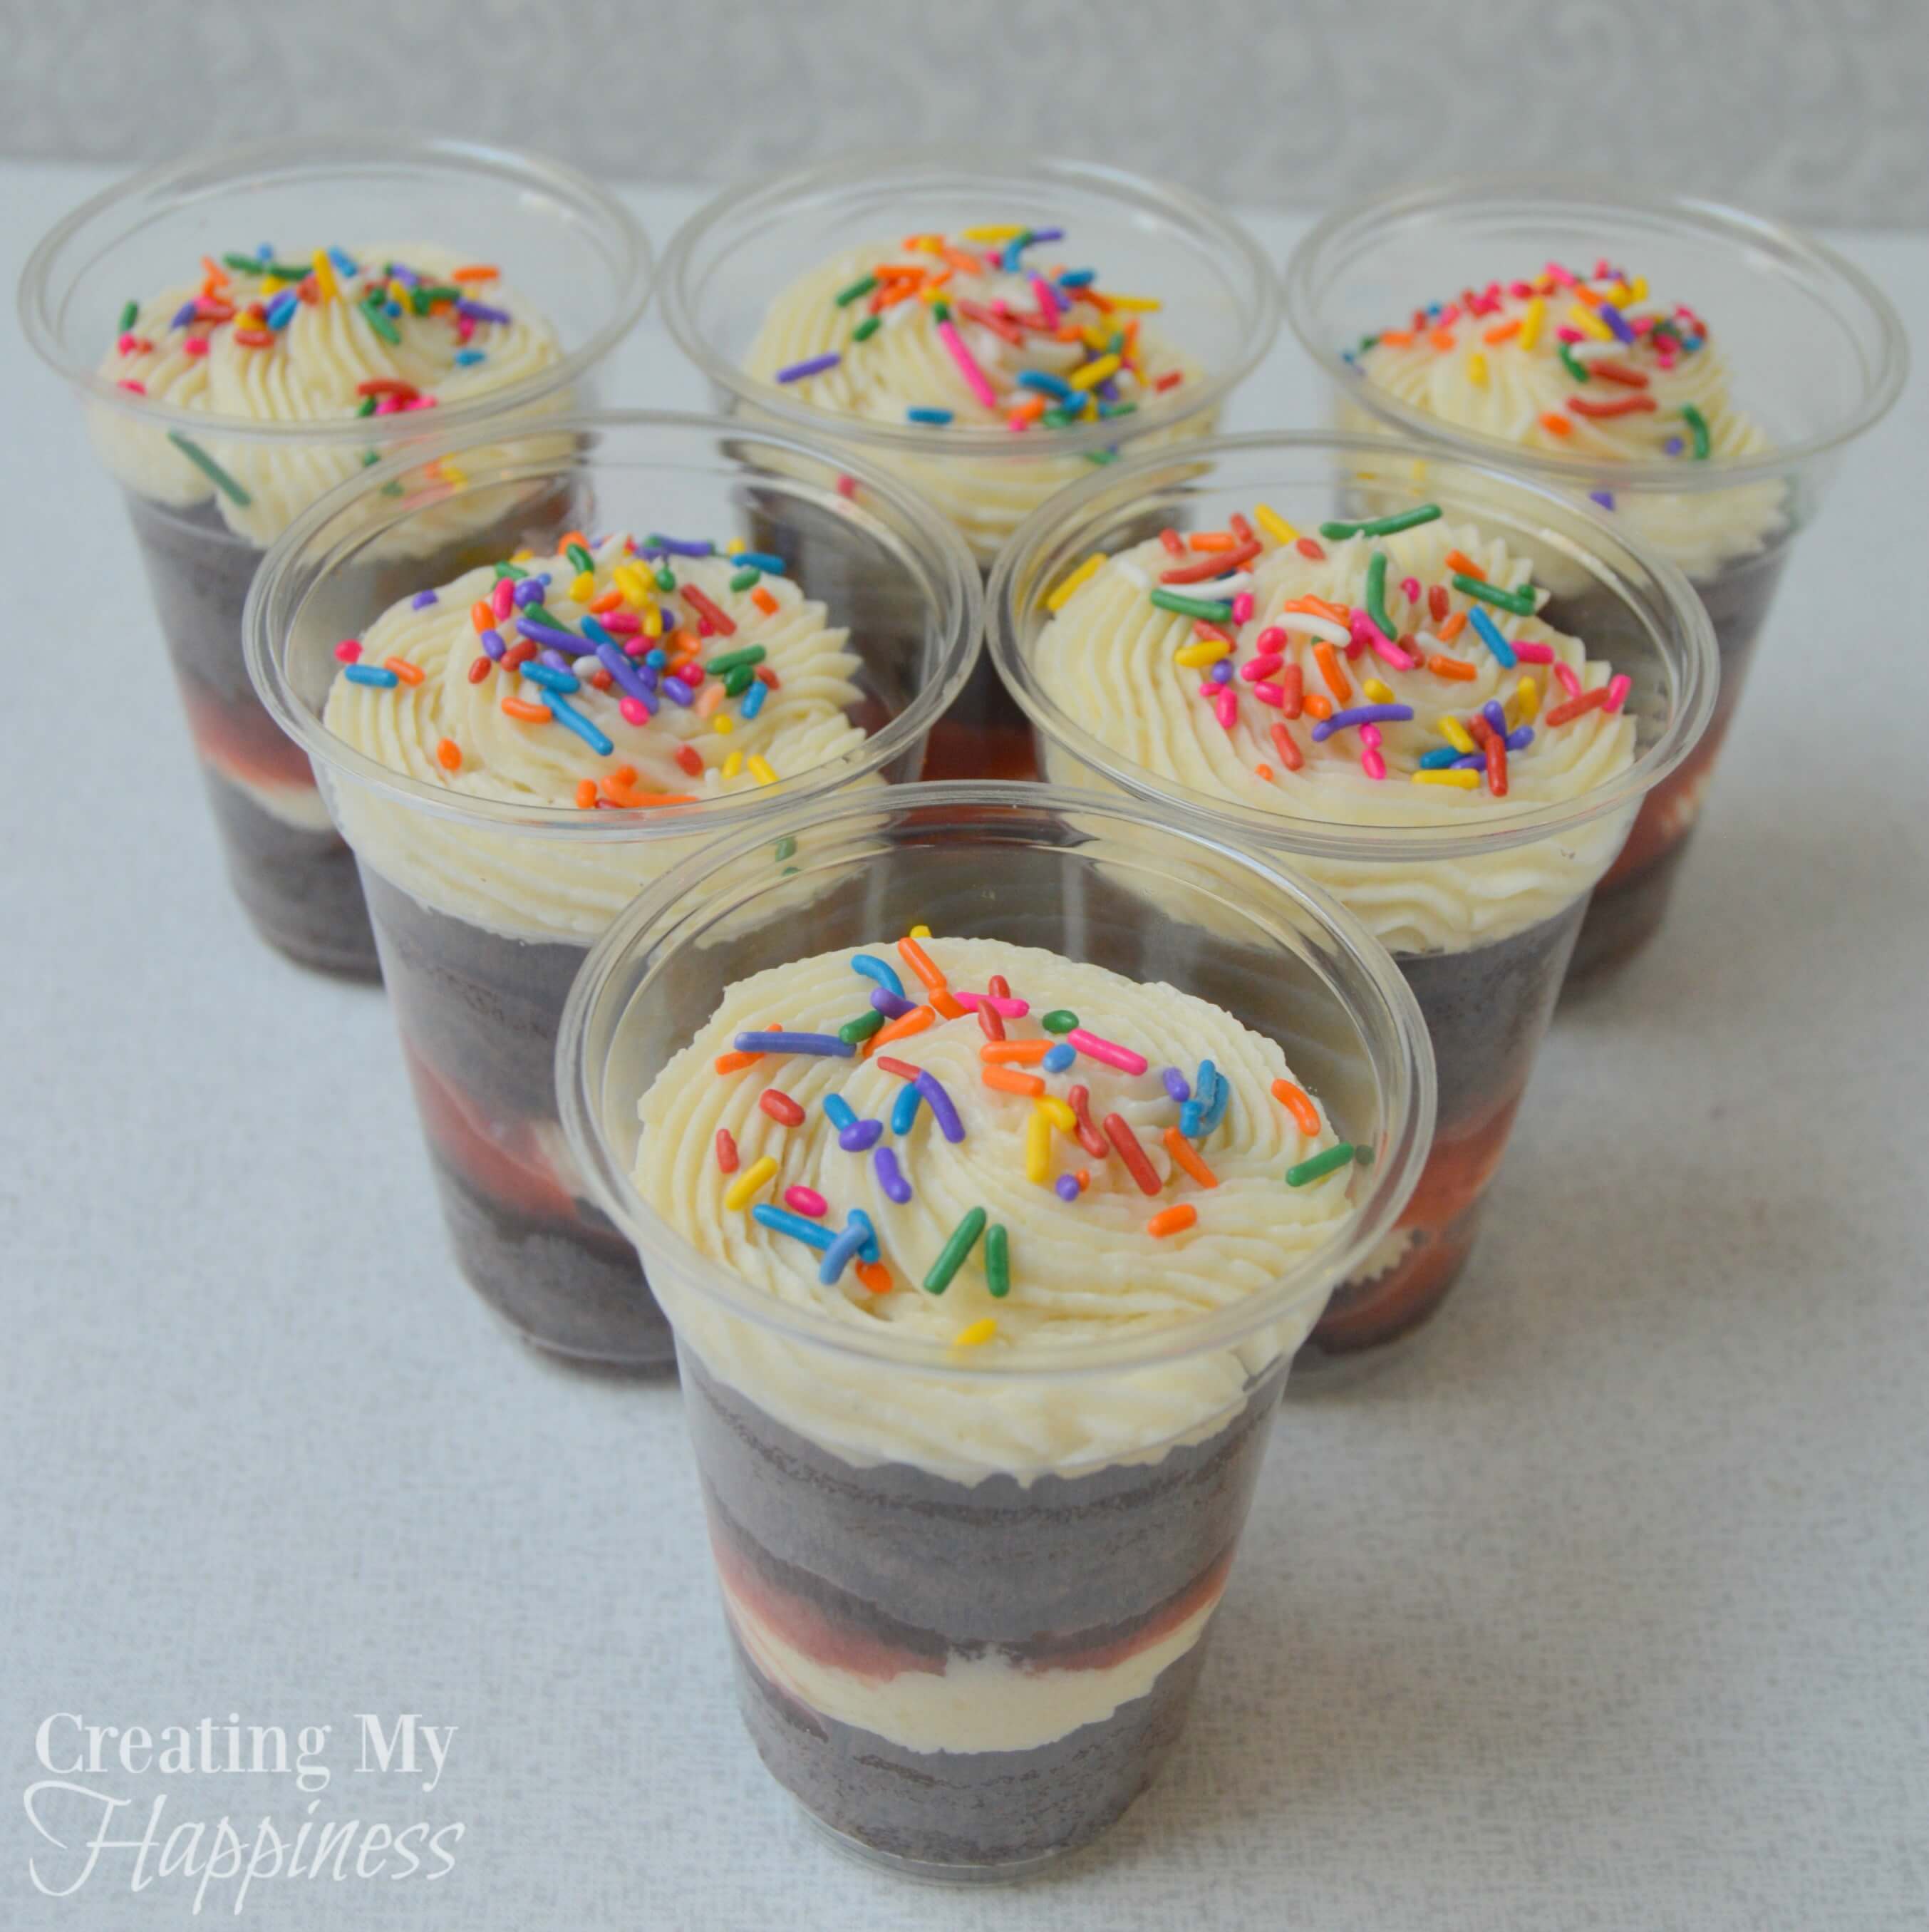 Cupcakes in a Cup